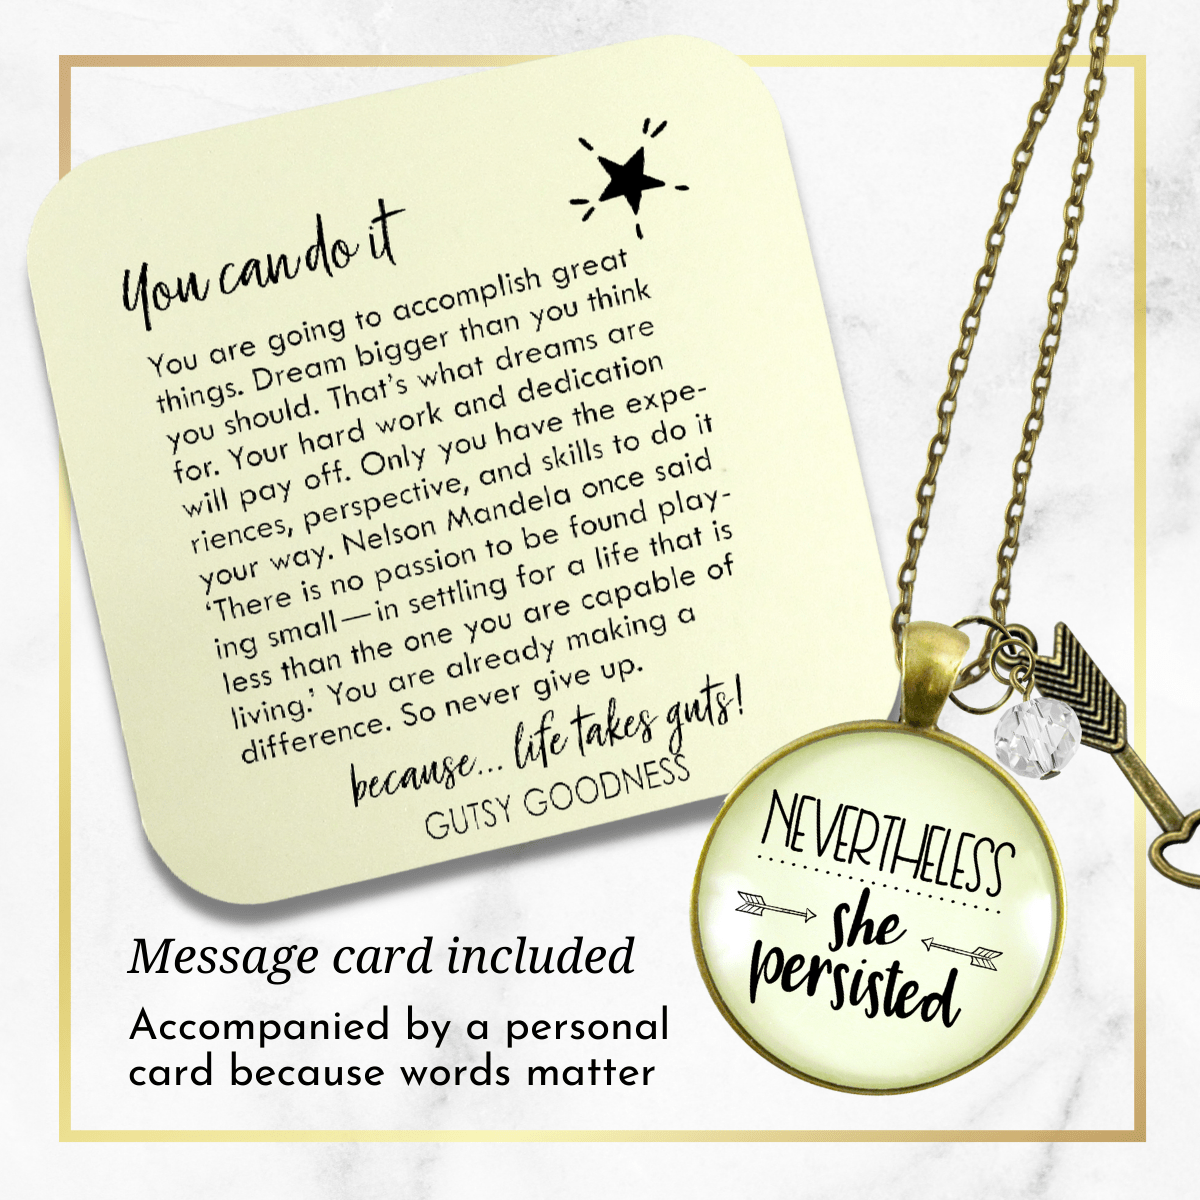 Gutsy Goodness Nevertheless She Persisted Necklace Hustle Success Quote Believe Jewelry - Gutsy Goodness Handmade Jewelry;Nevertheless She Persisted Necklace Hustle Success Quote Believe Jewelry - Gutsy Goodness Handmade Jewelry Gifts